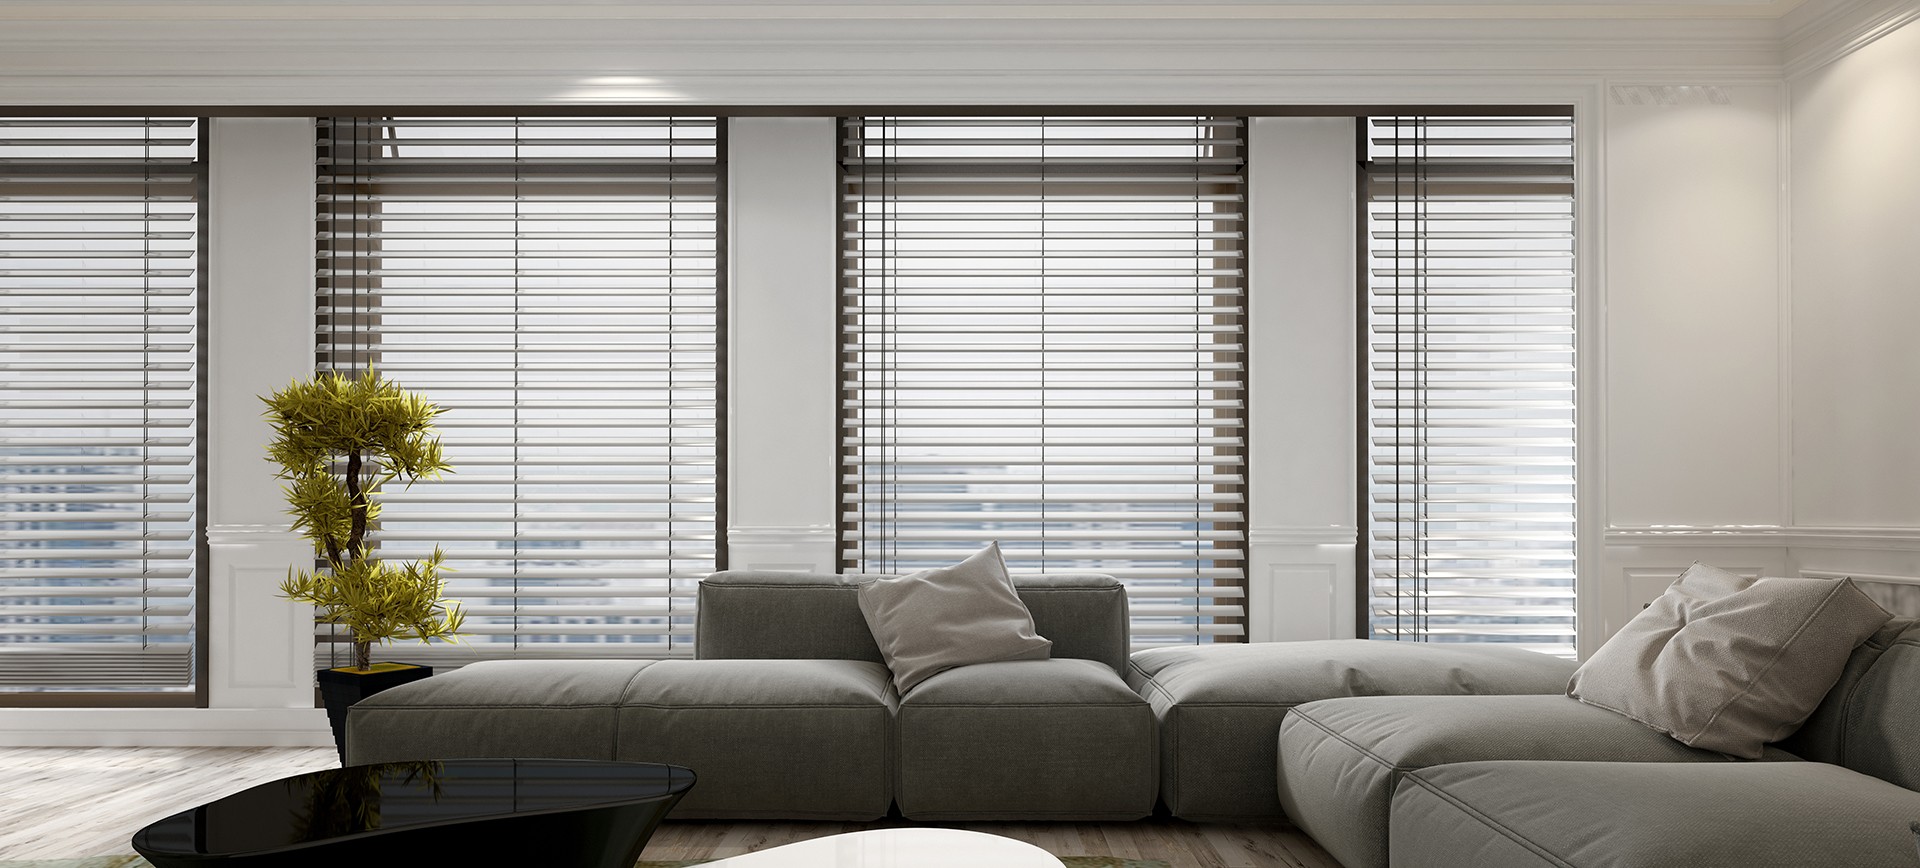 Custom Blinds Near Me from Window Treatments by Design